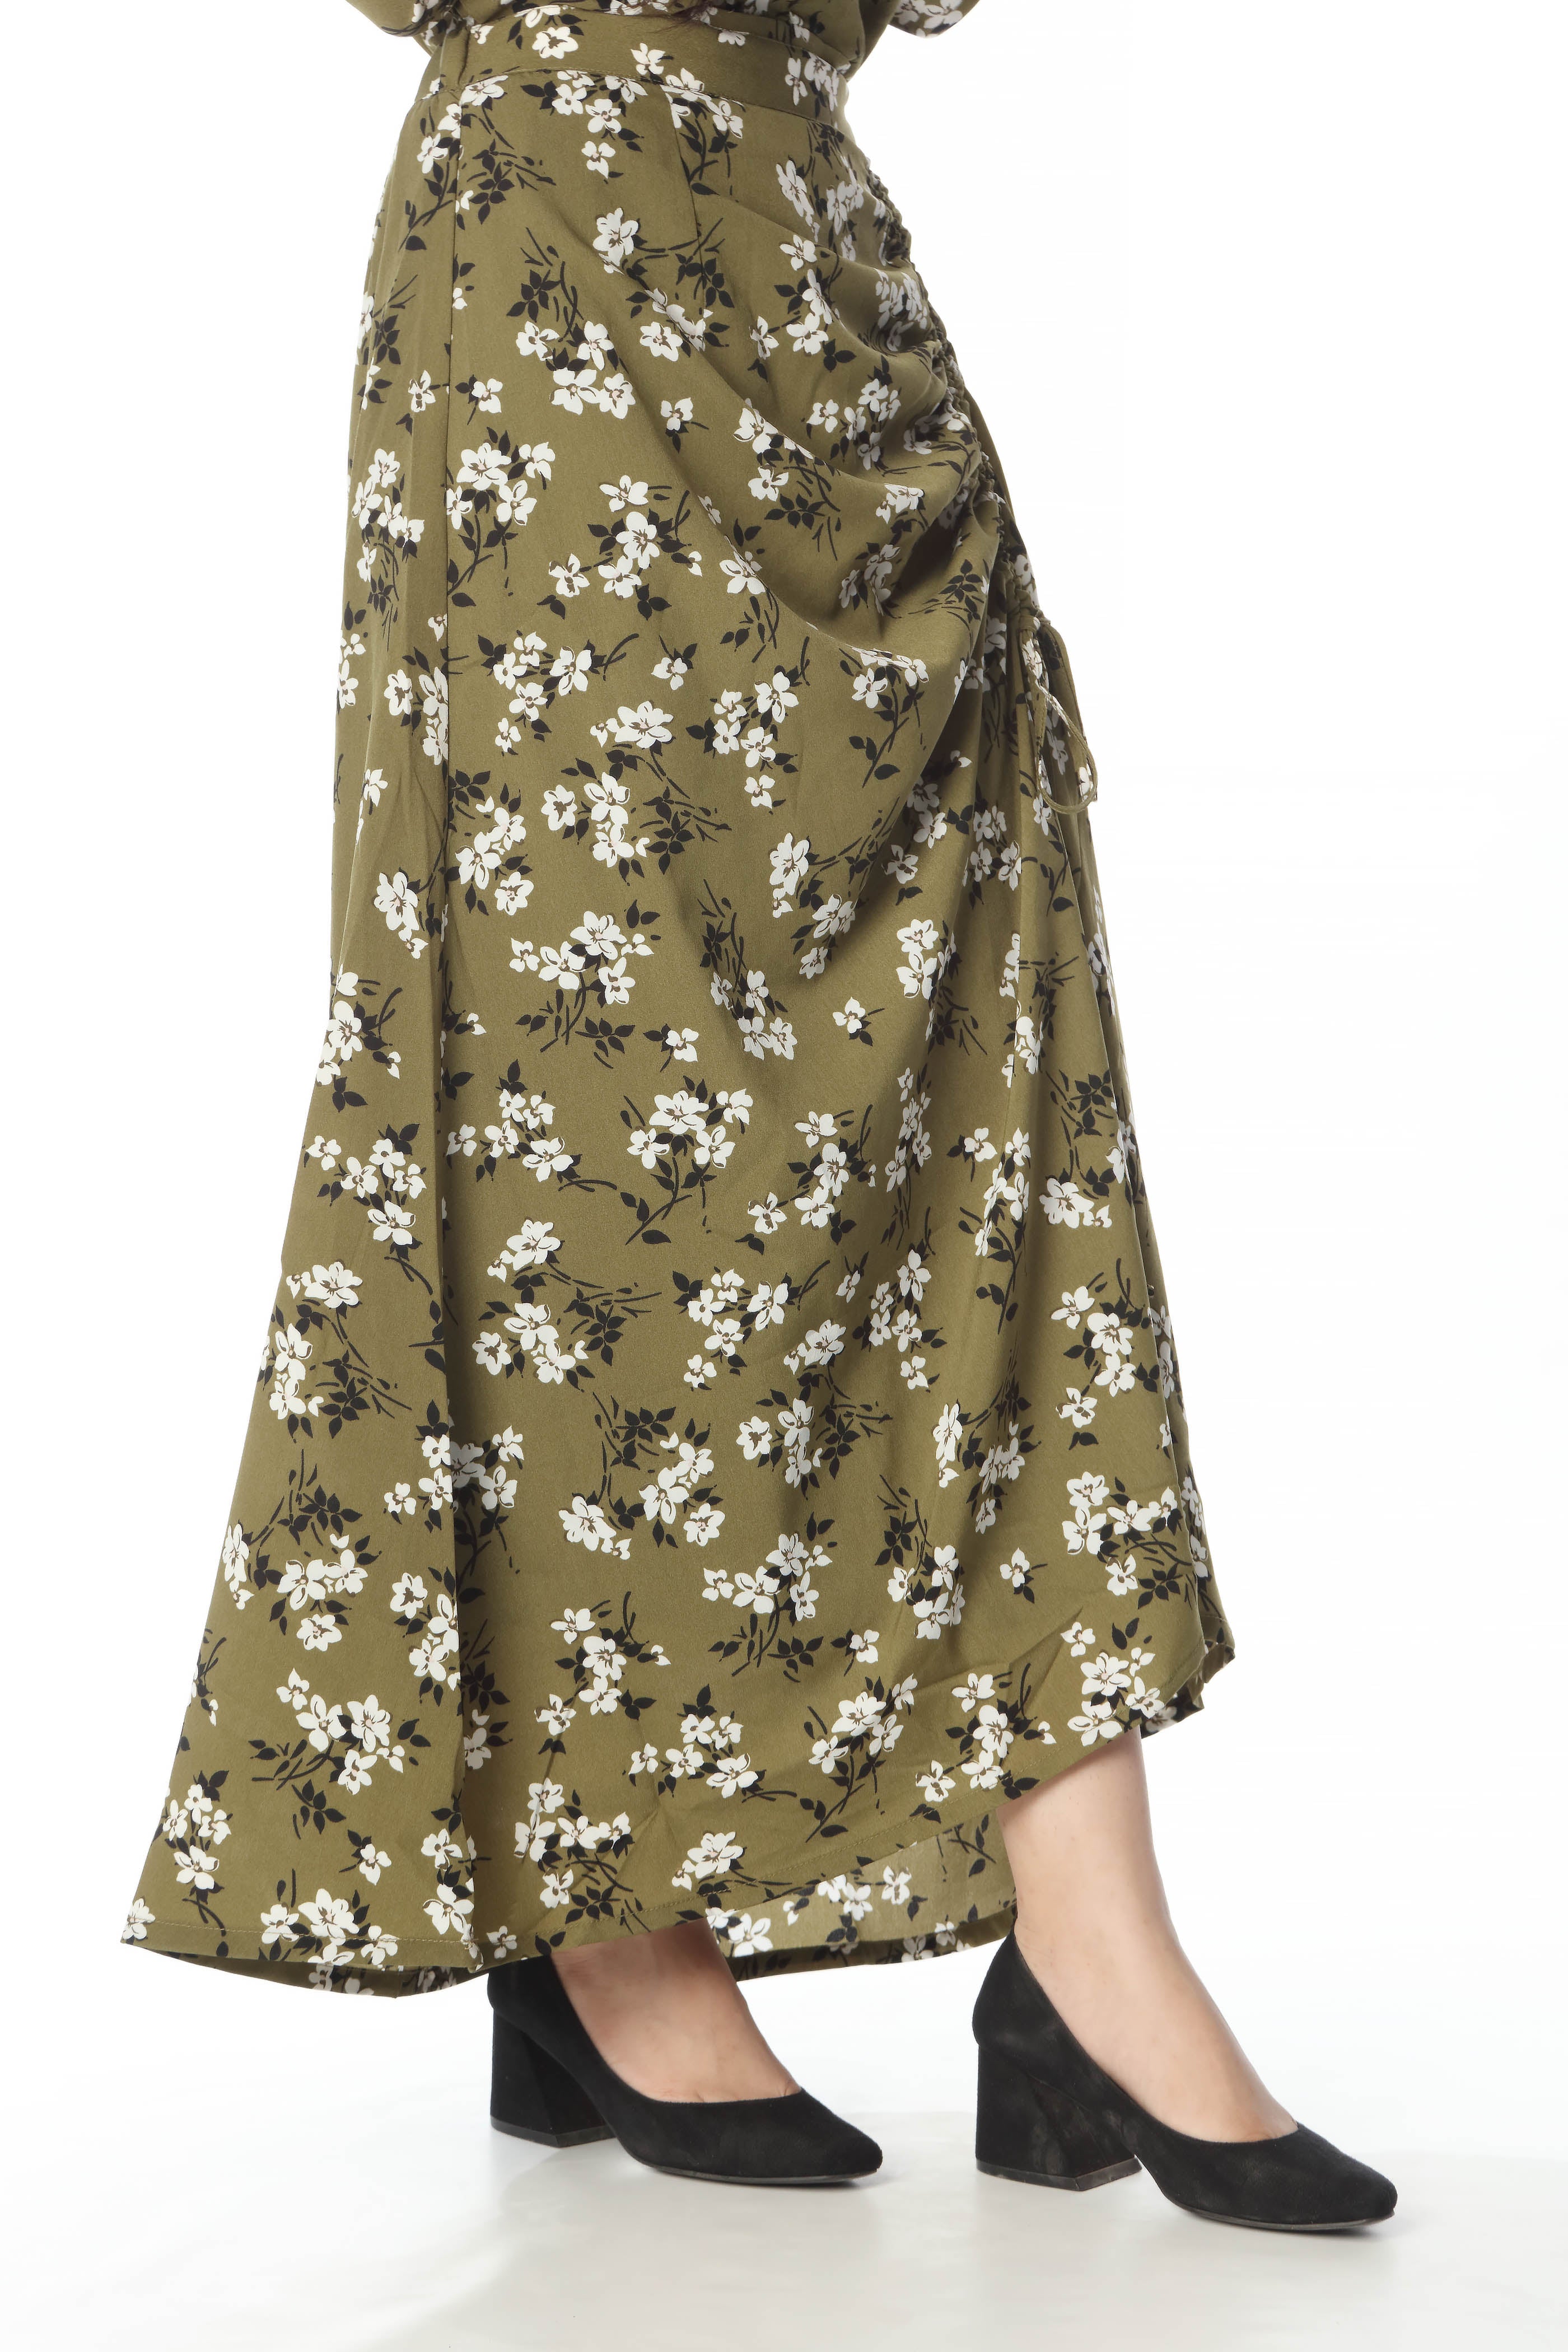 PRINTED SKIRT WITH SIDE DRAW STRING (SSGSKR-38)